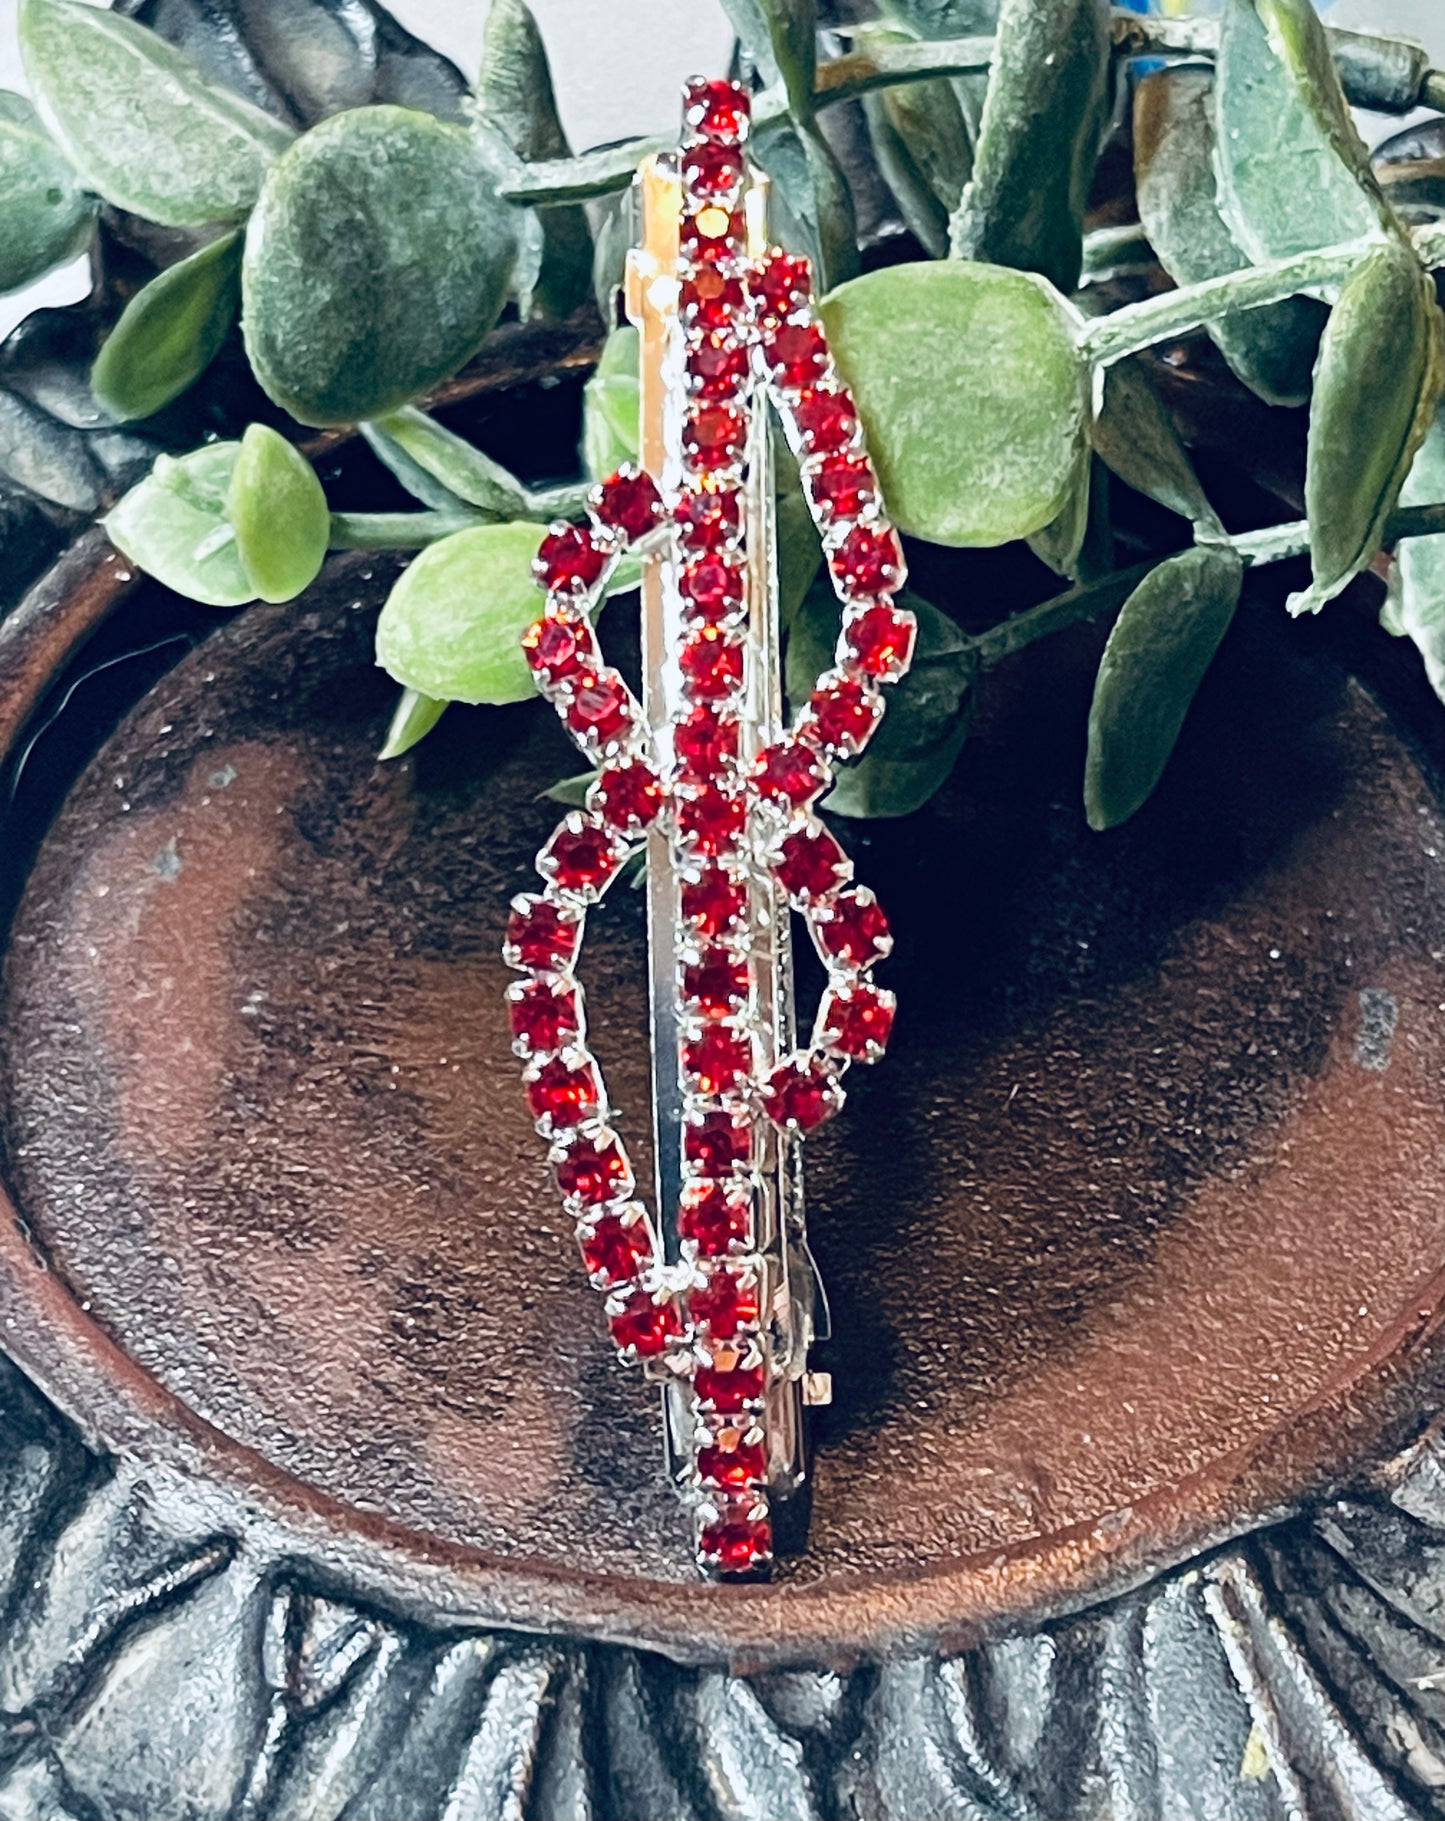 Red Crystal rhinestone barrette approximately 3.0” silver tone formal hair accessories gift wedding bridesmaid prom birthday mother of bride groom